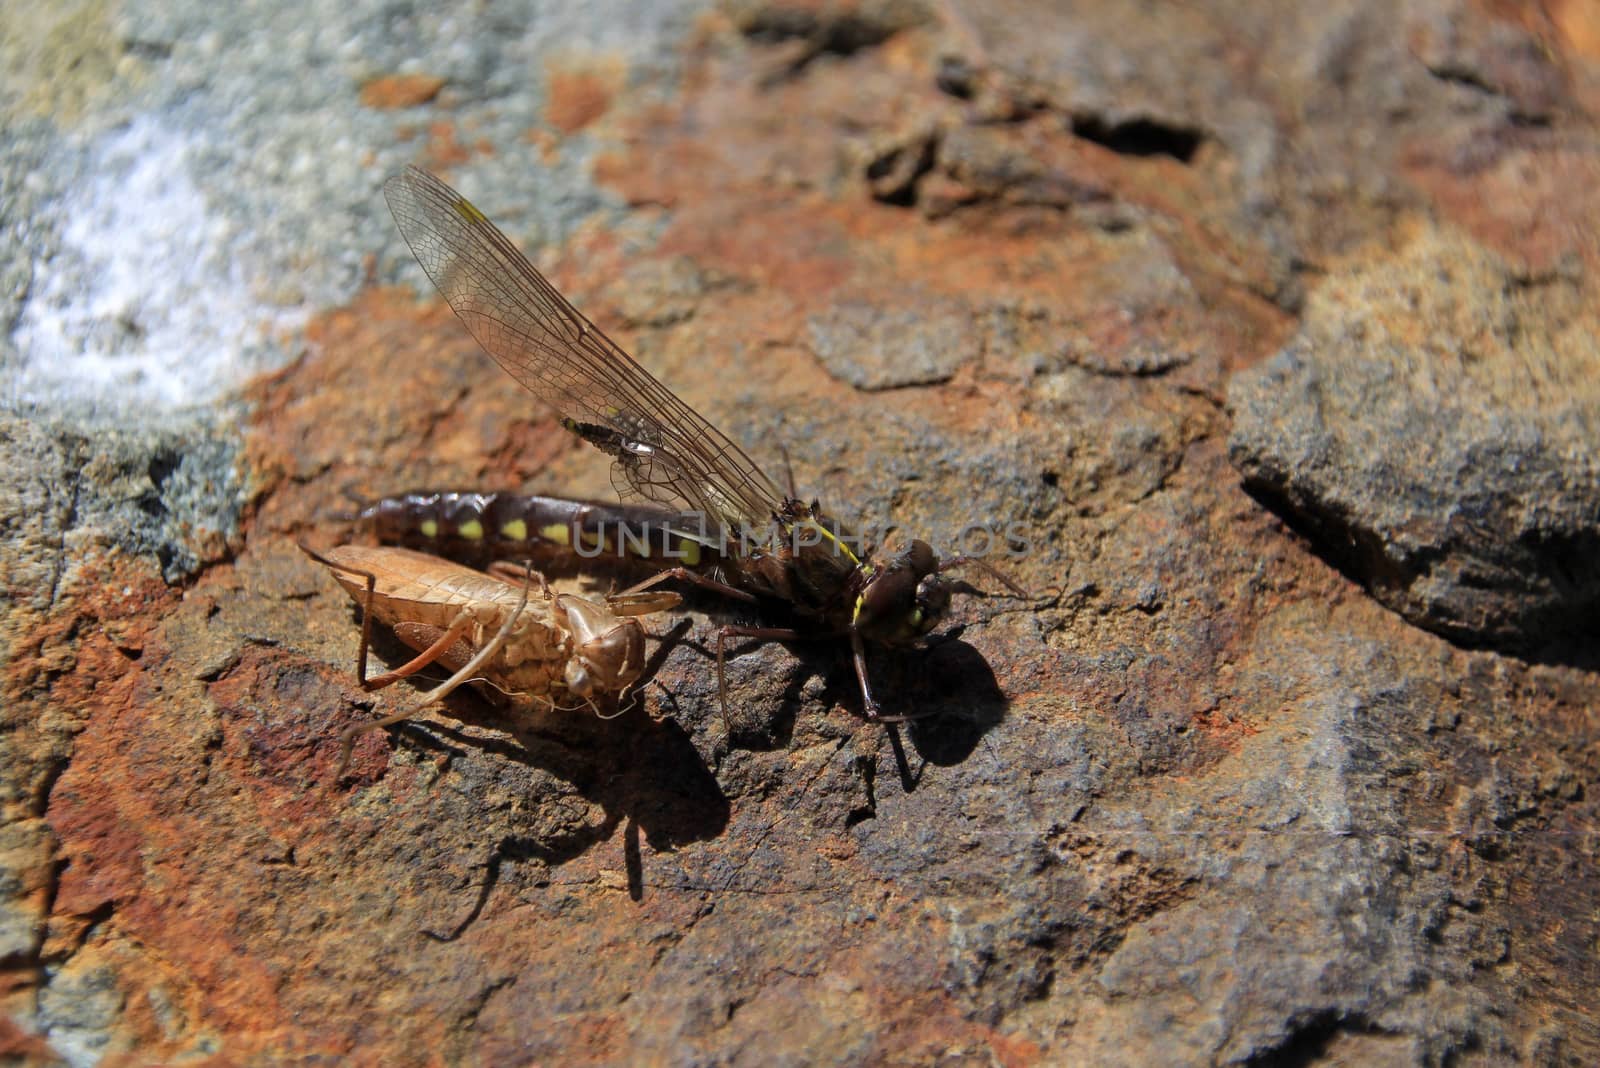 Young dragonfly just hatched from the larva, along Carretera Austral, Patagonia, Chile